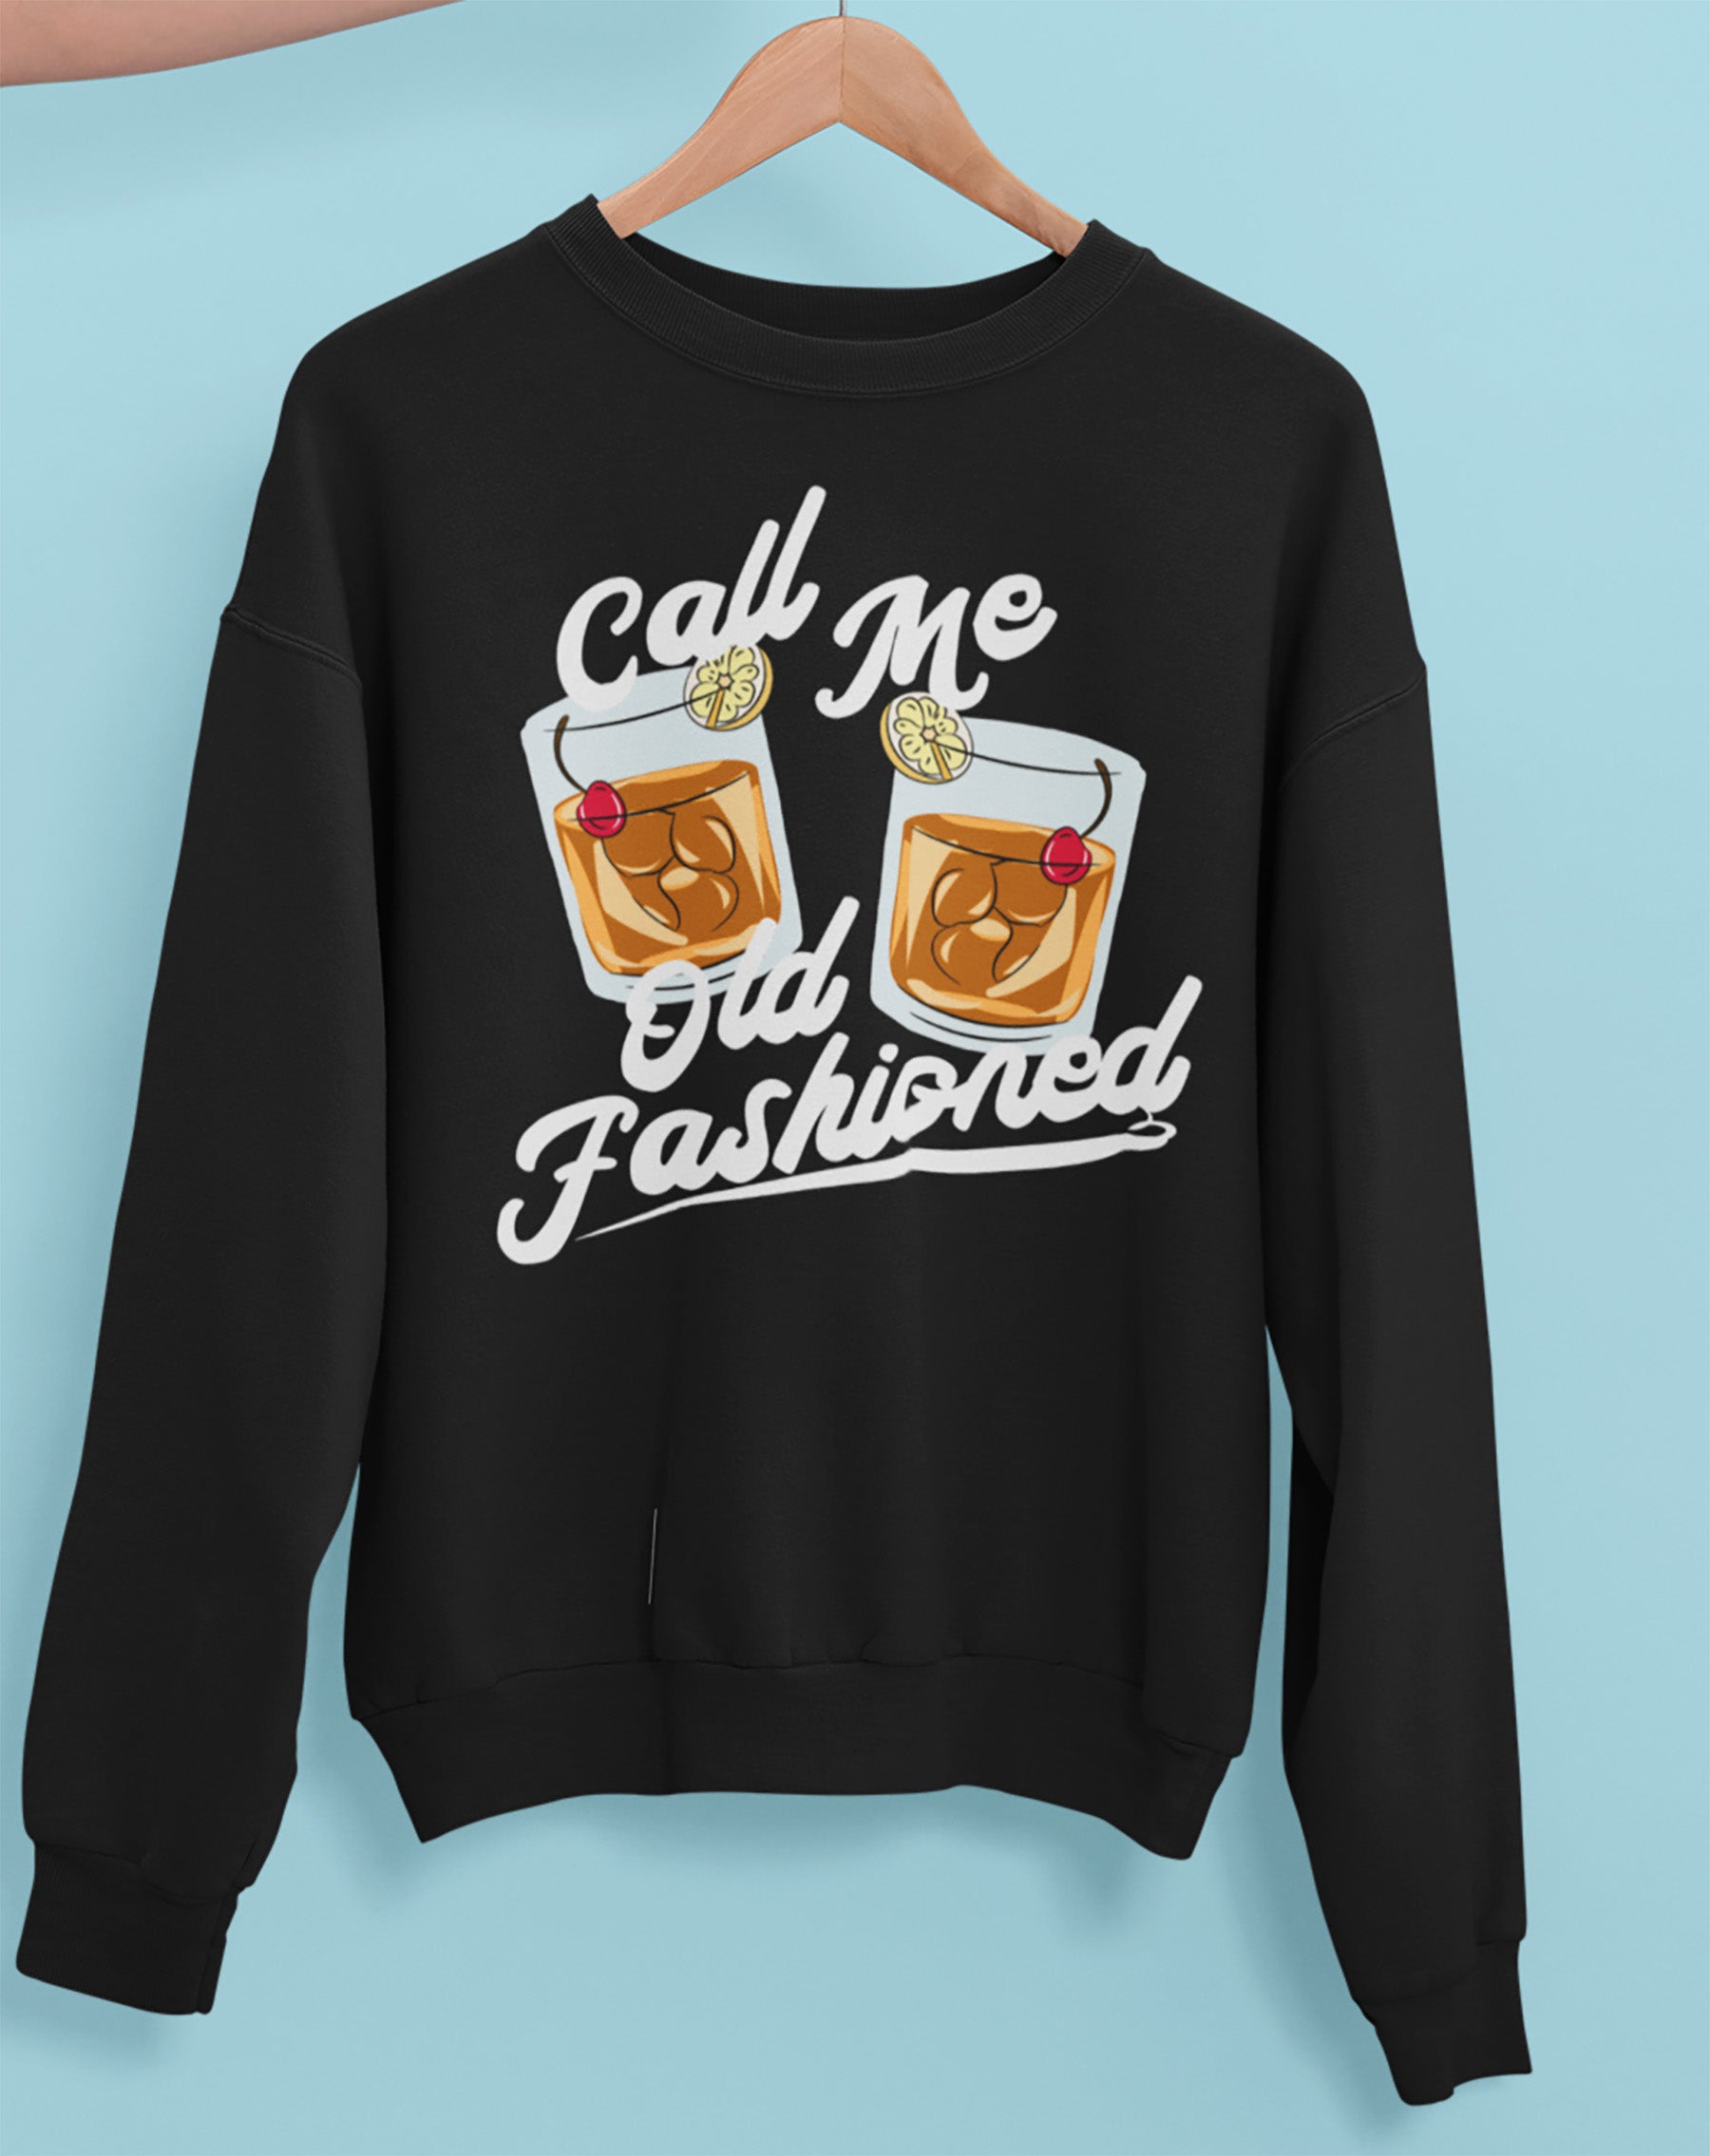 Black sweatshirt with old fashioned cocktail whiskey glass that says call me old fashioned - HighCiti